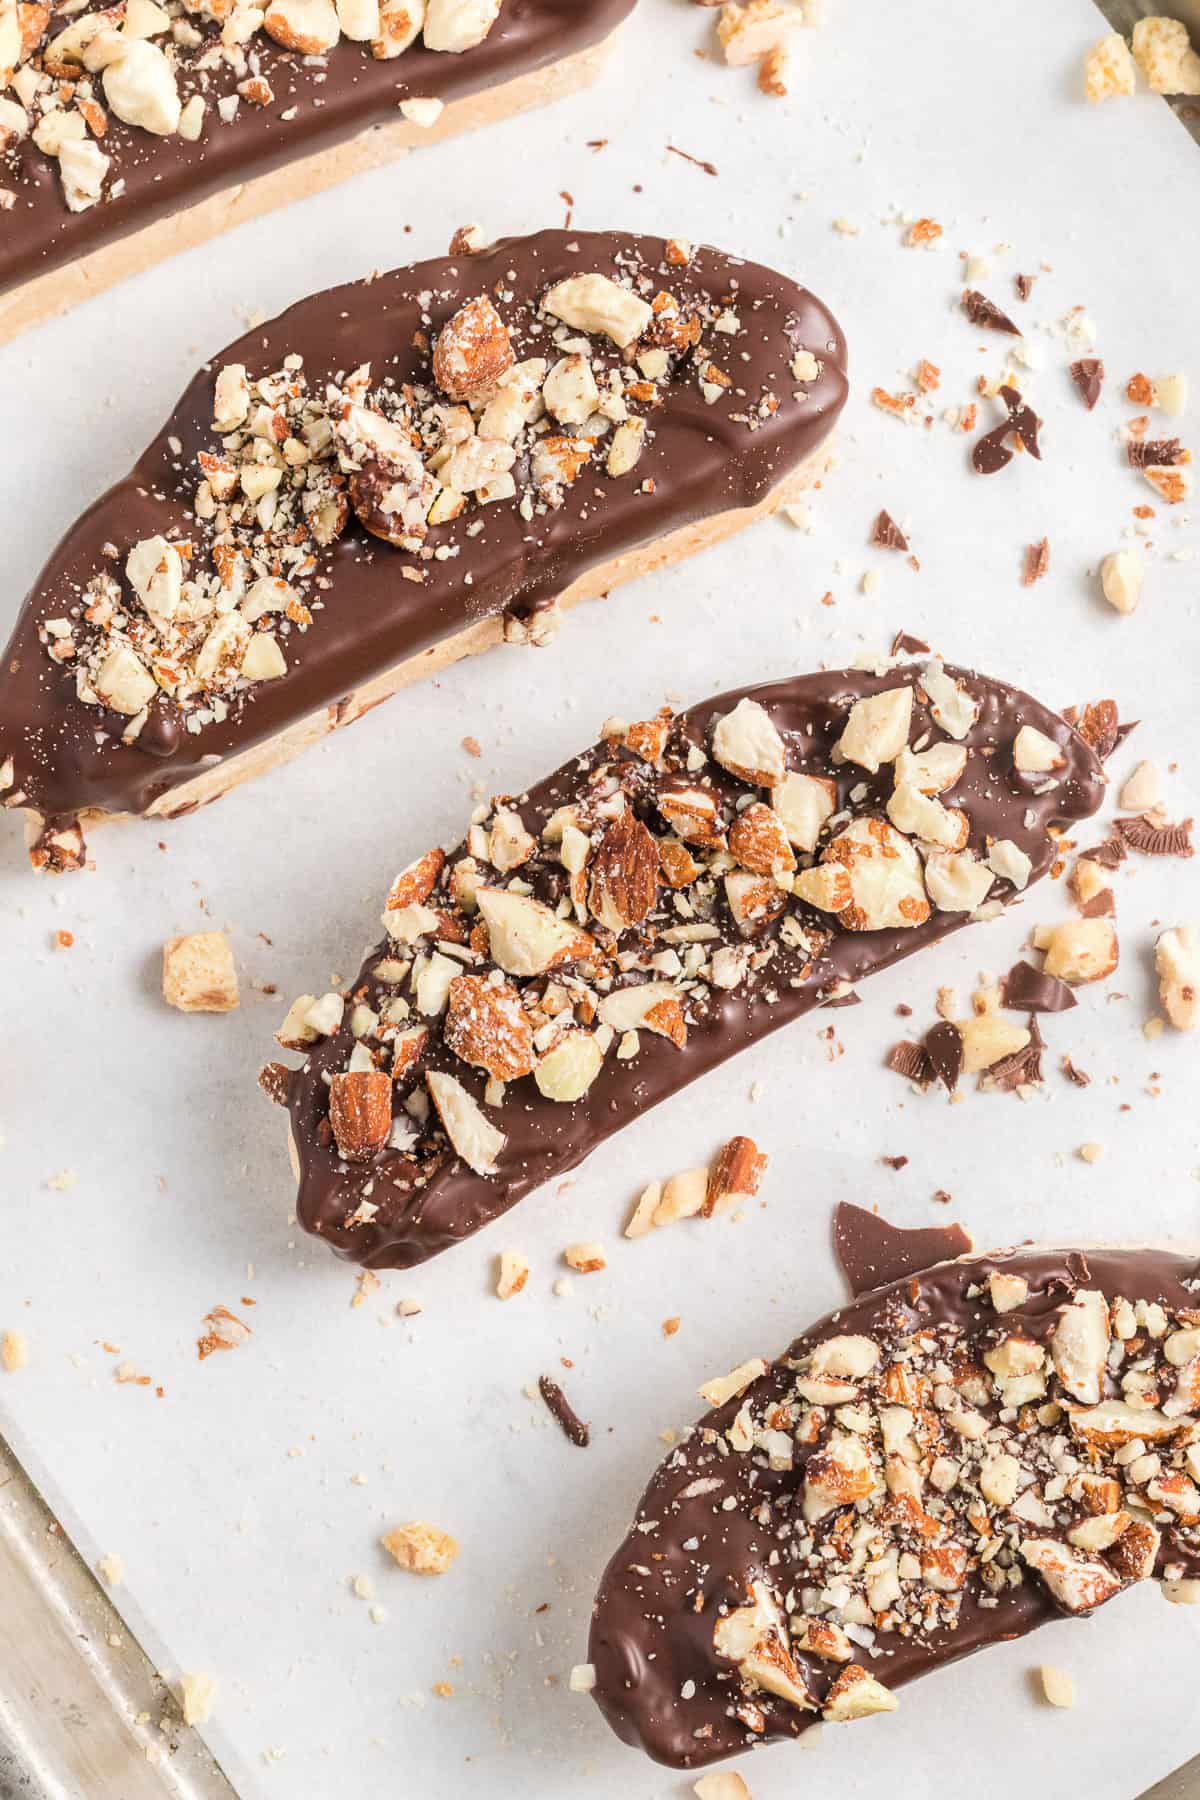 Sliced biscotti decorated with melted chocolate and toasted almonds.